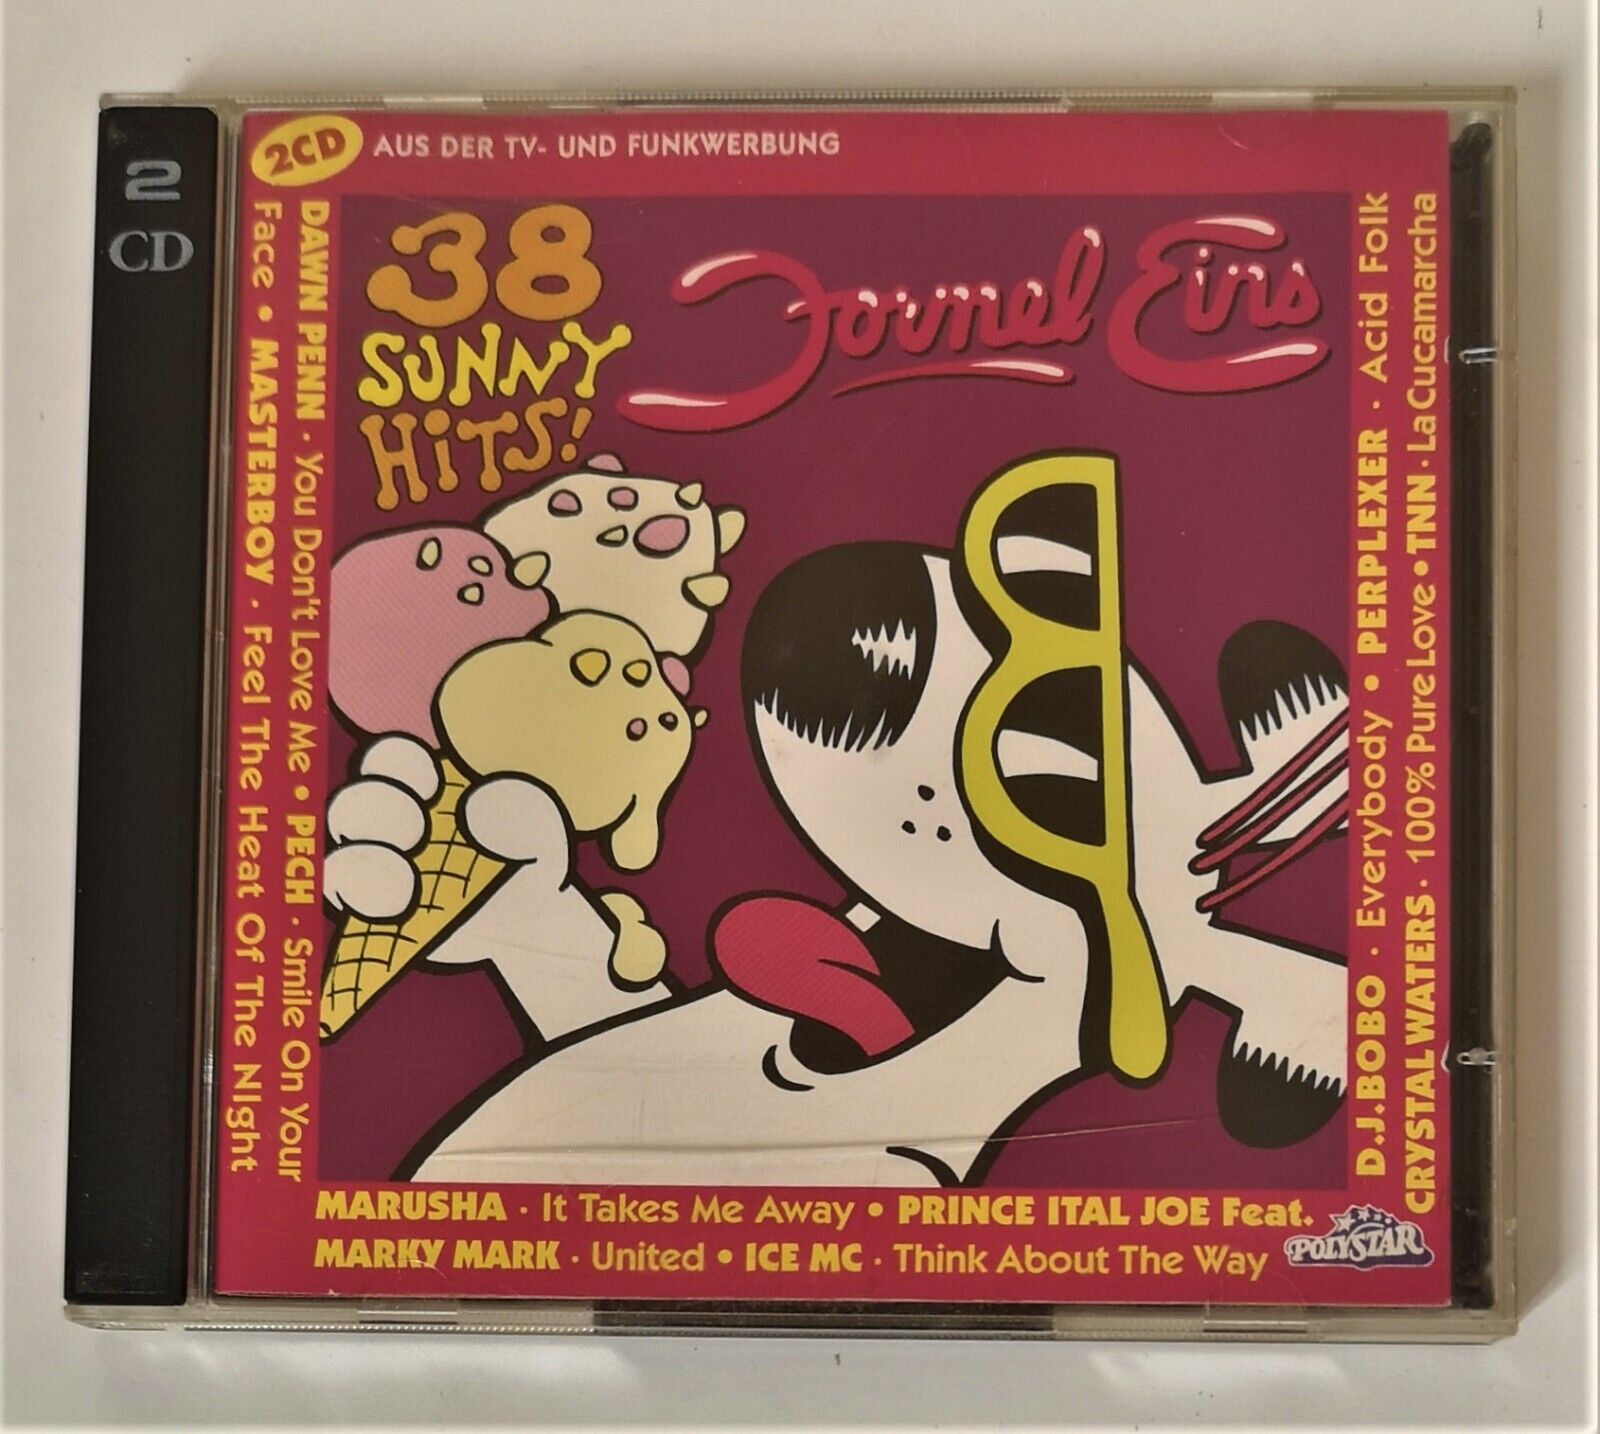 Formel Eins - Sunny Hits! 2xCD (1994) Brand New